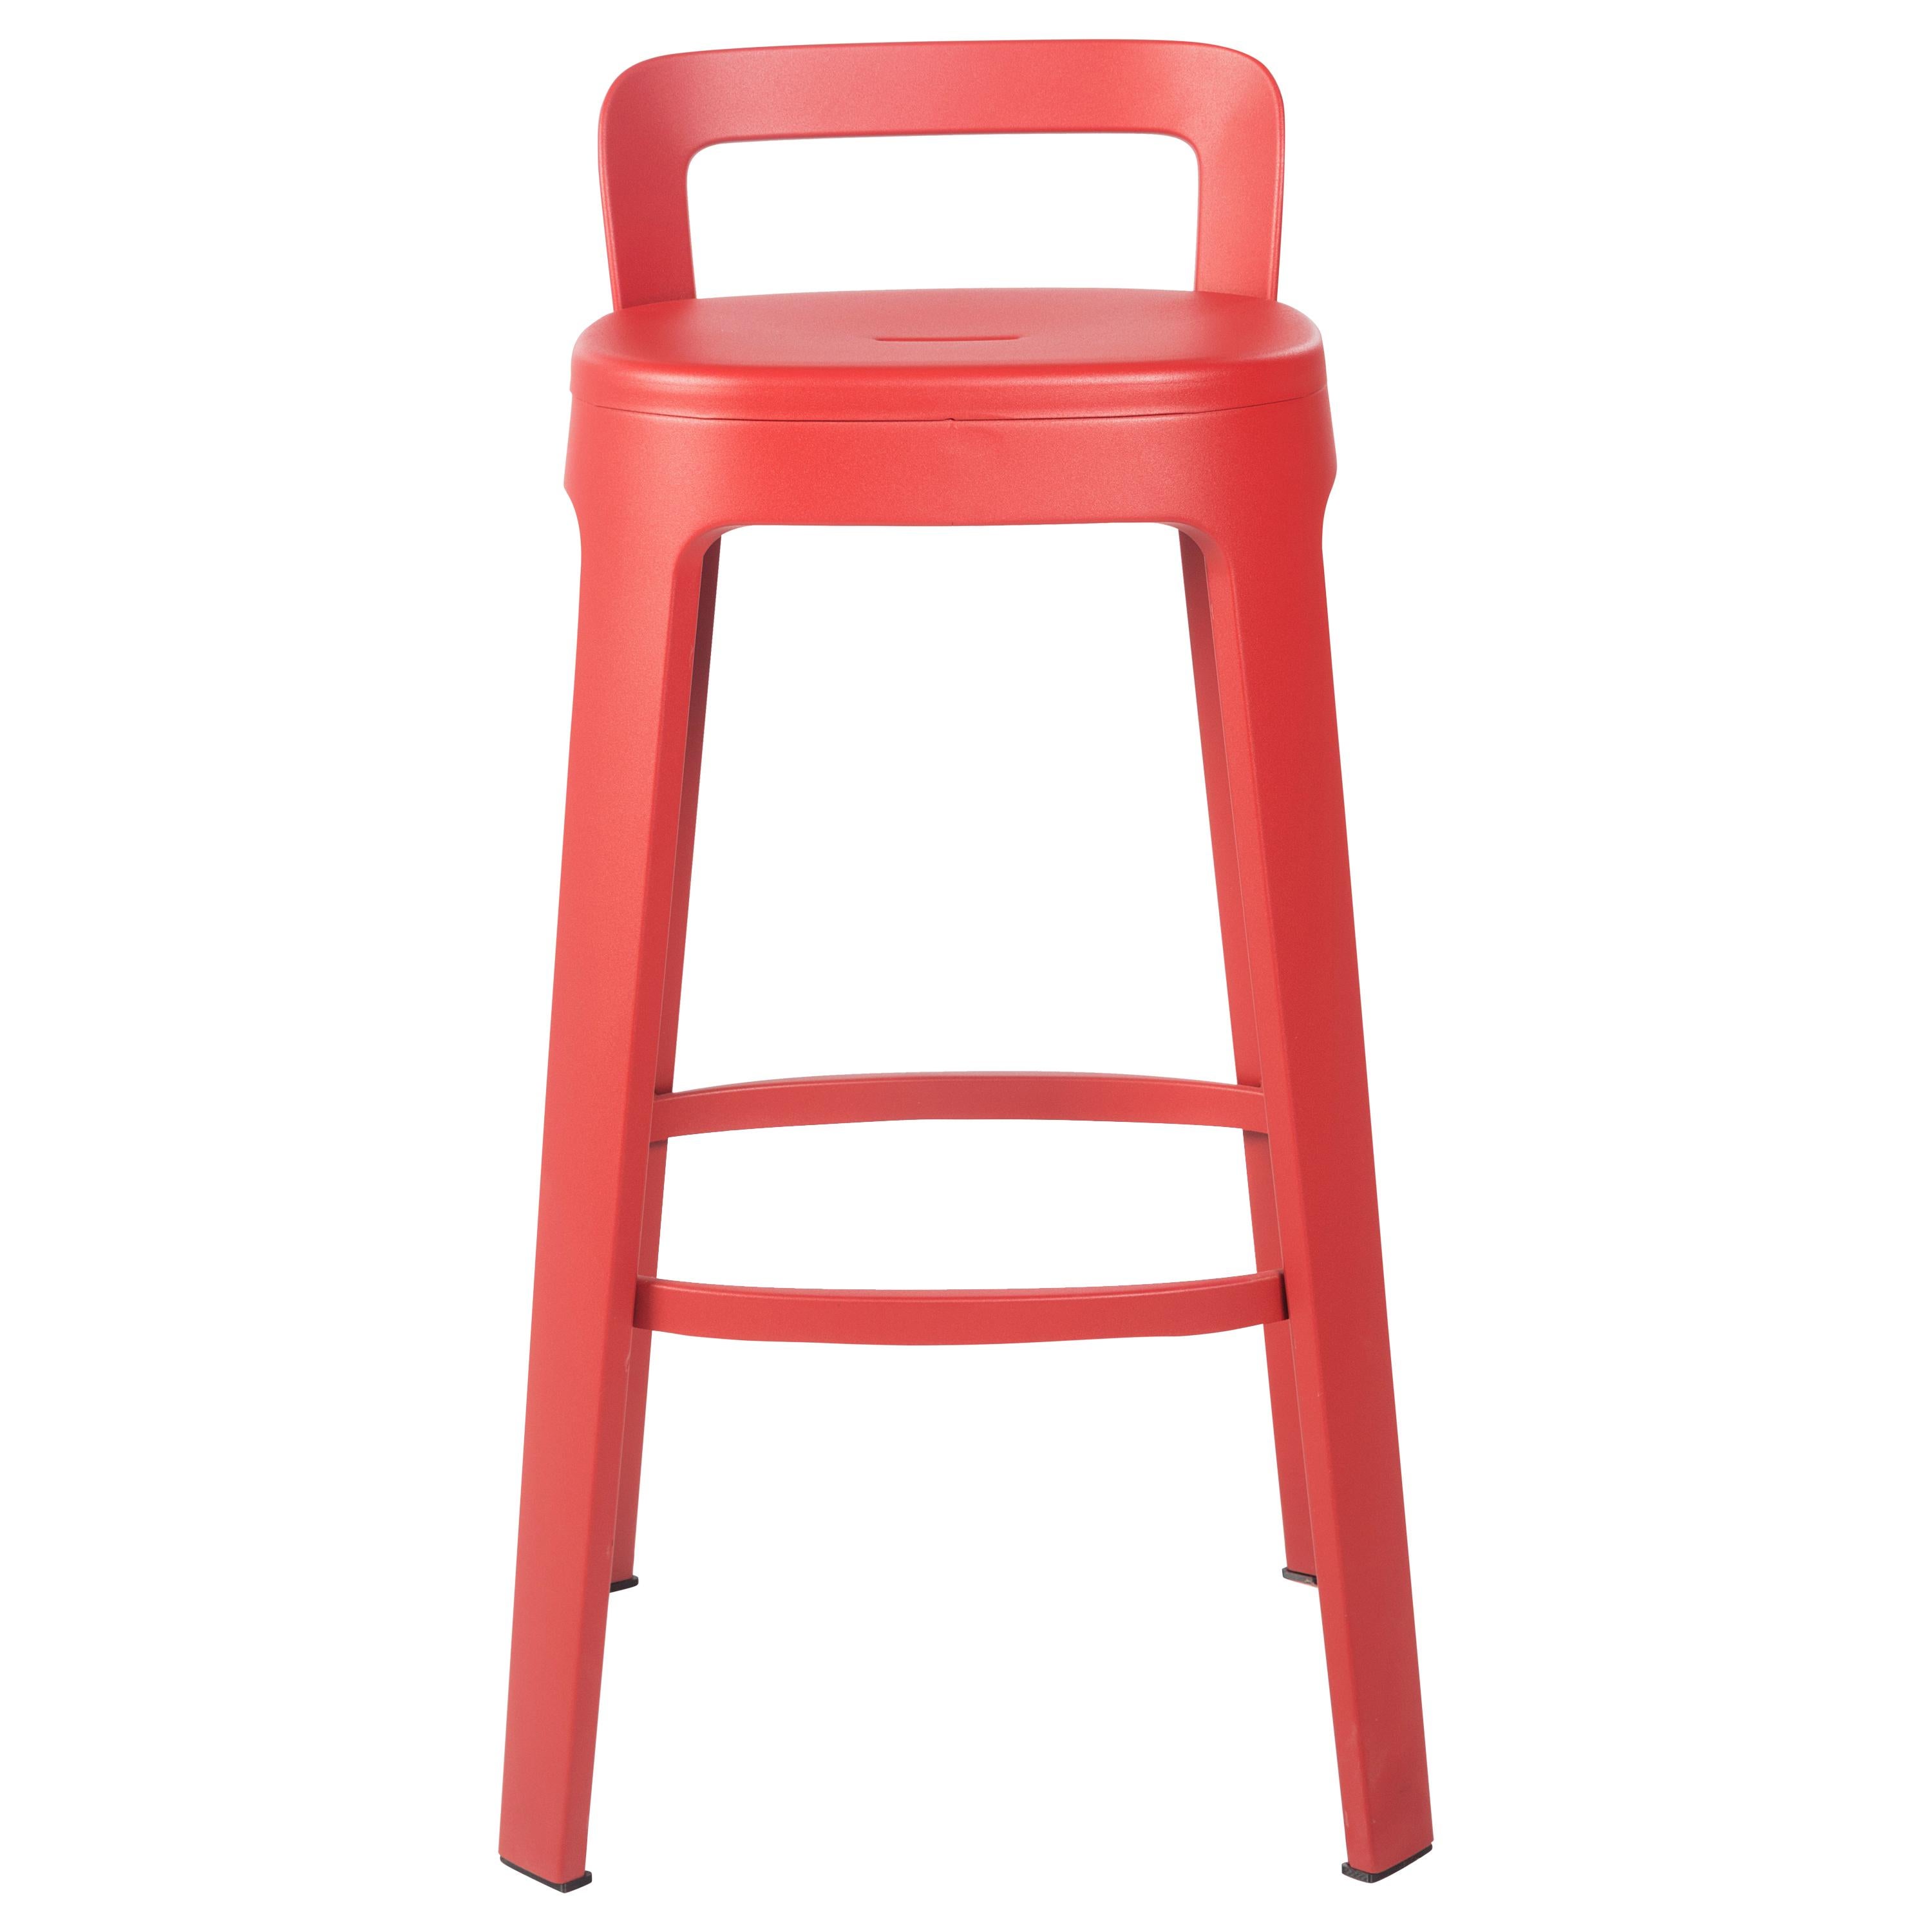 Ombra Bar Stool with Backrest, Red by Emiliana Design Studio For Sale